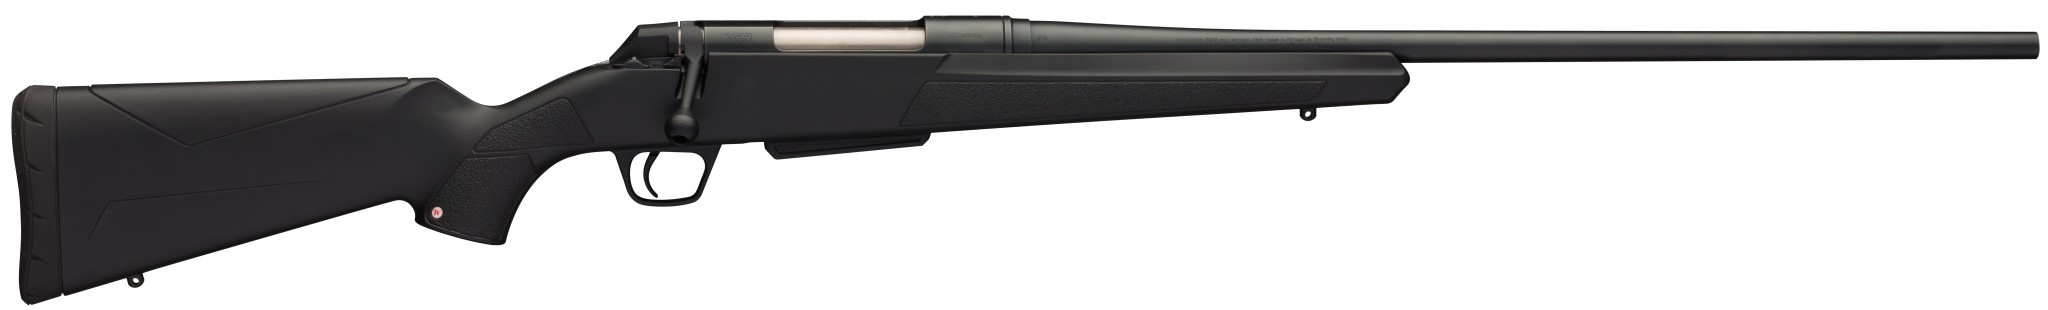 WINCHESTER WINCHESTER XPR RIFLE, 6.5 CREEDMOOR, BLACK